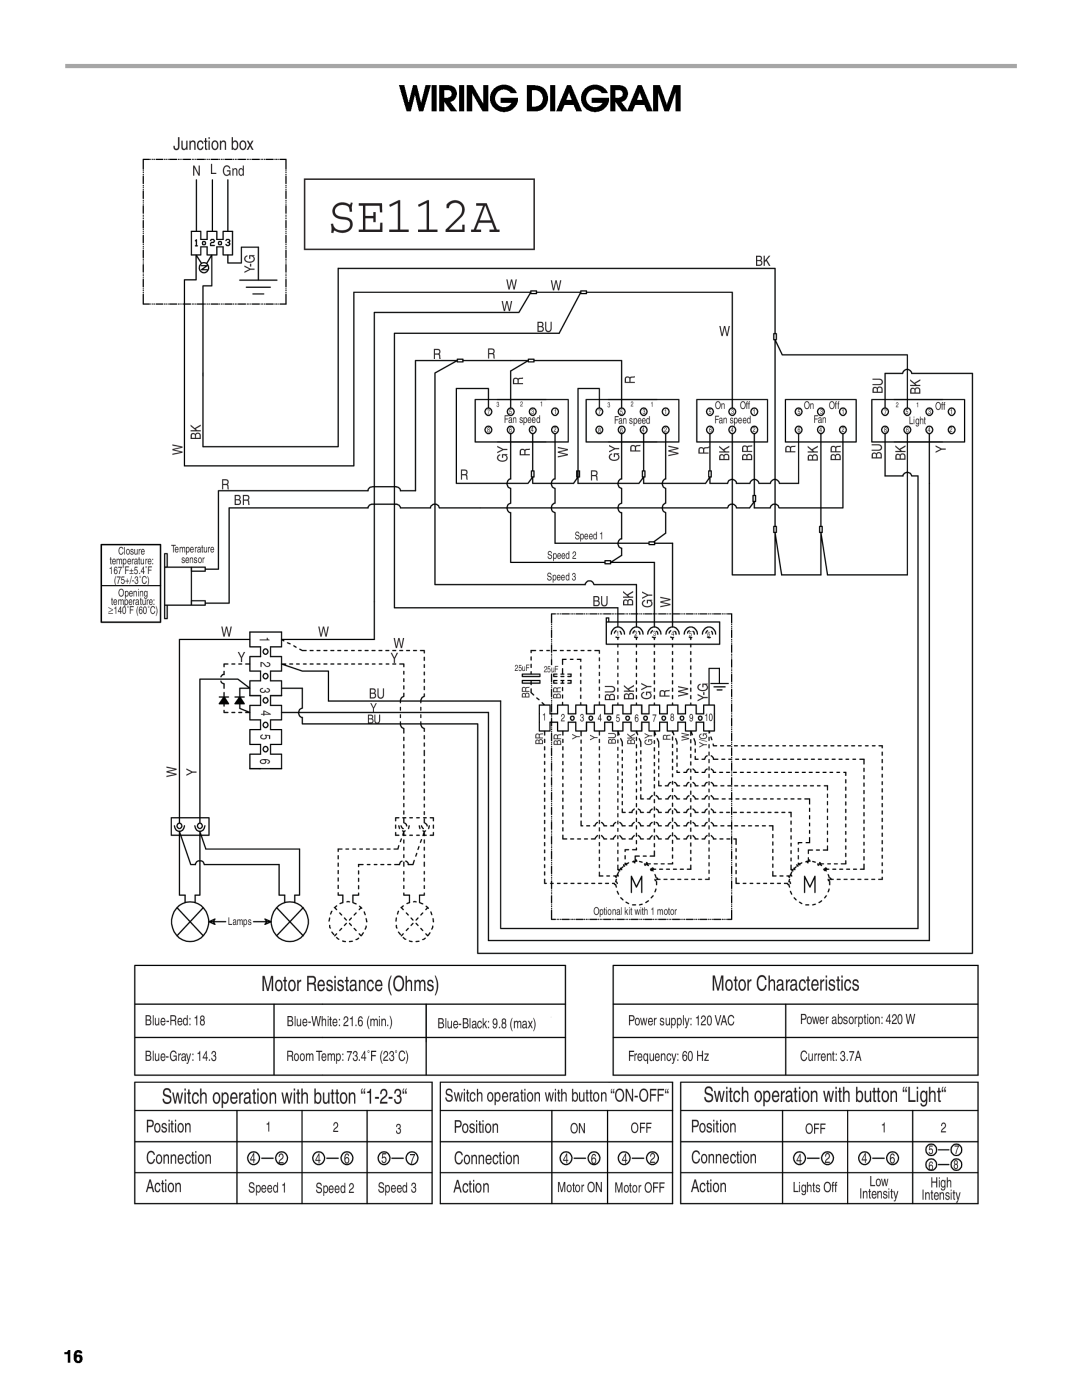 Whirlpool 48, 36 installation instructions SE112A, Wiring Diagram, Motor Resistance Ohms, Motor Characteristics 